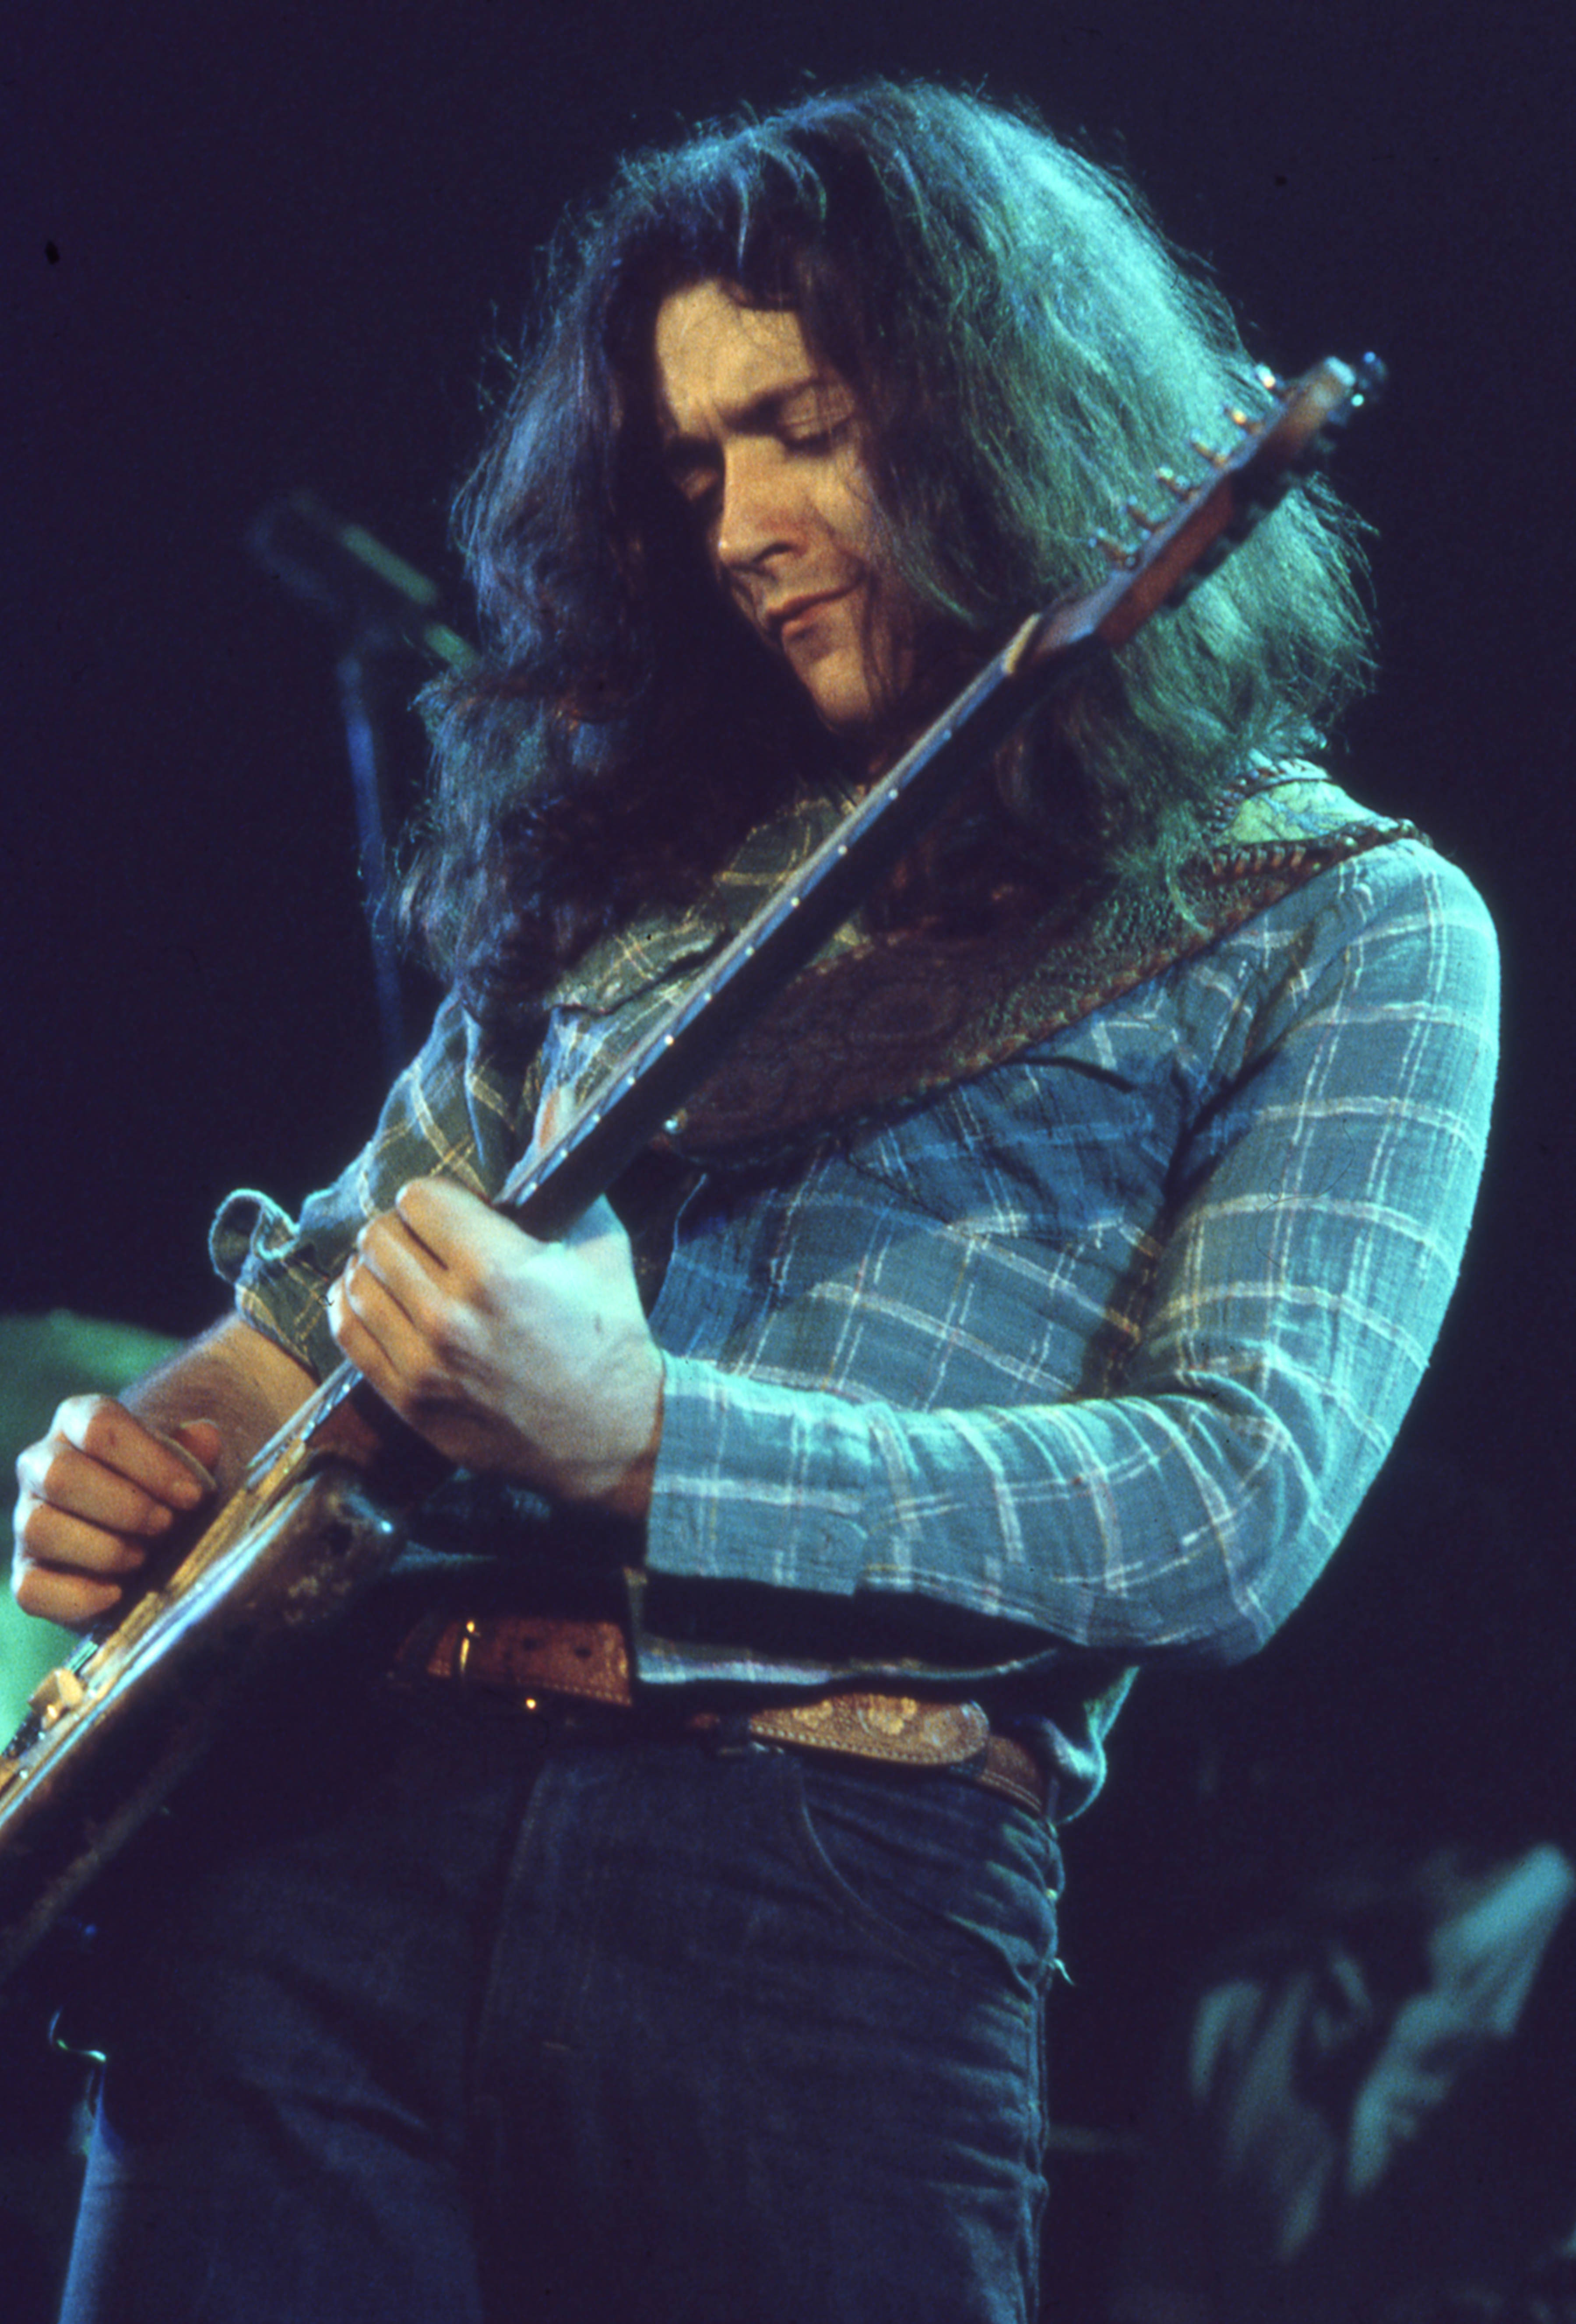 Rory Gallagher Check Shirt Wizard Live In 77 Ramzine